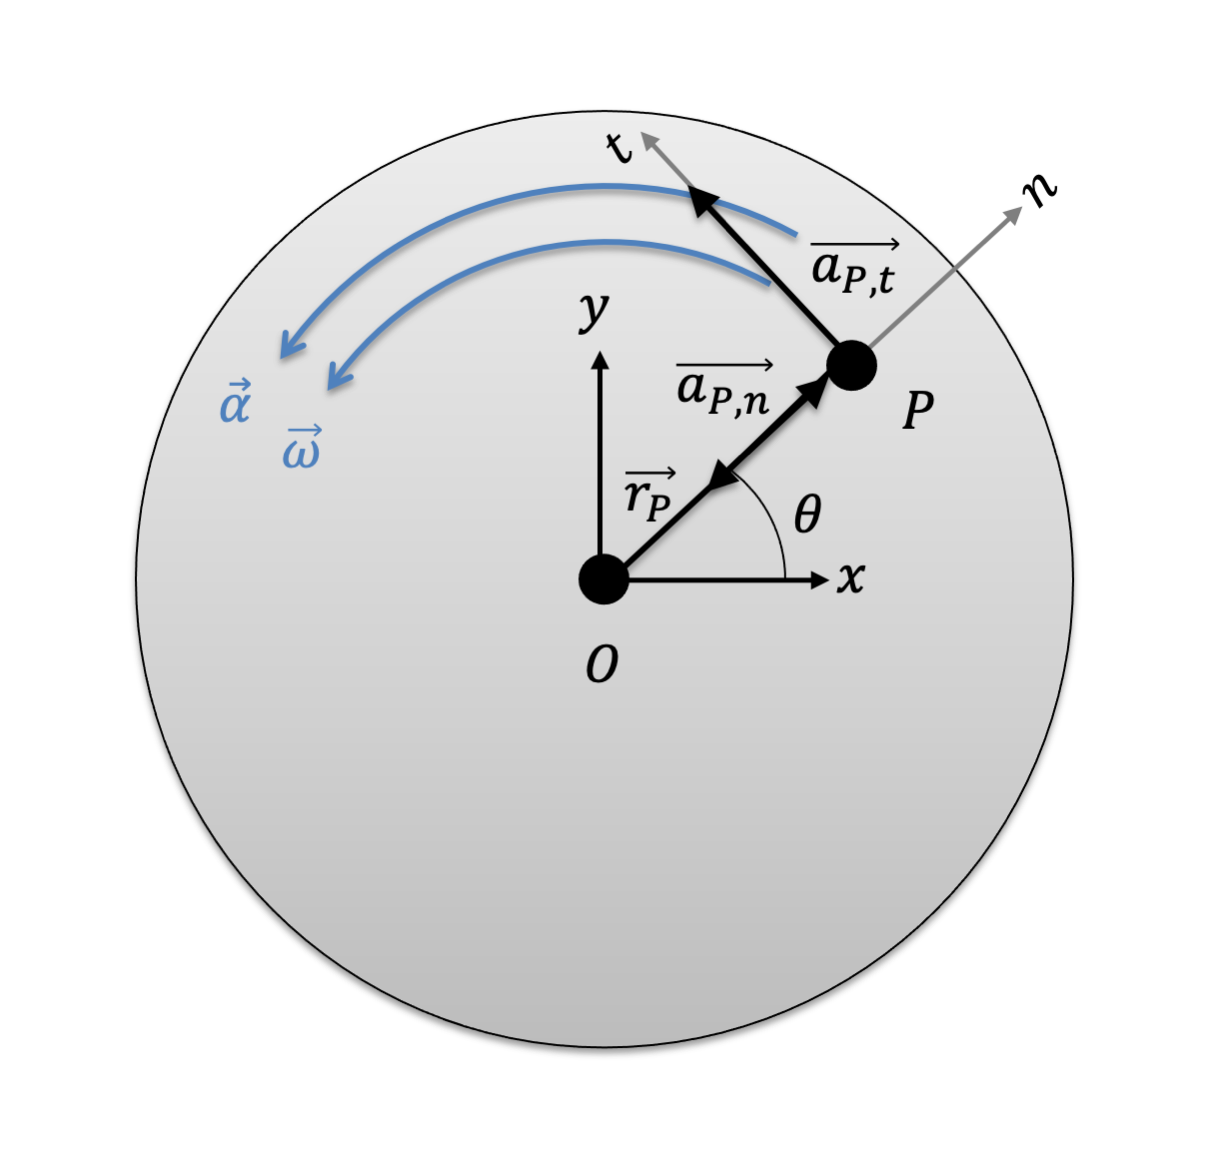 Acceleration of point on a rotating fixed axis